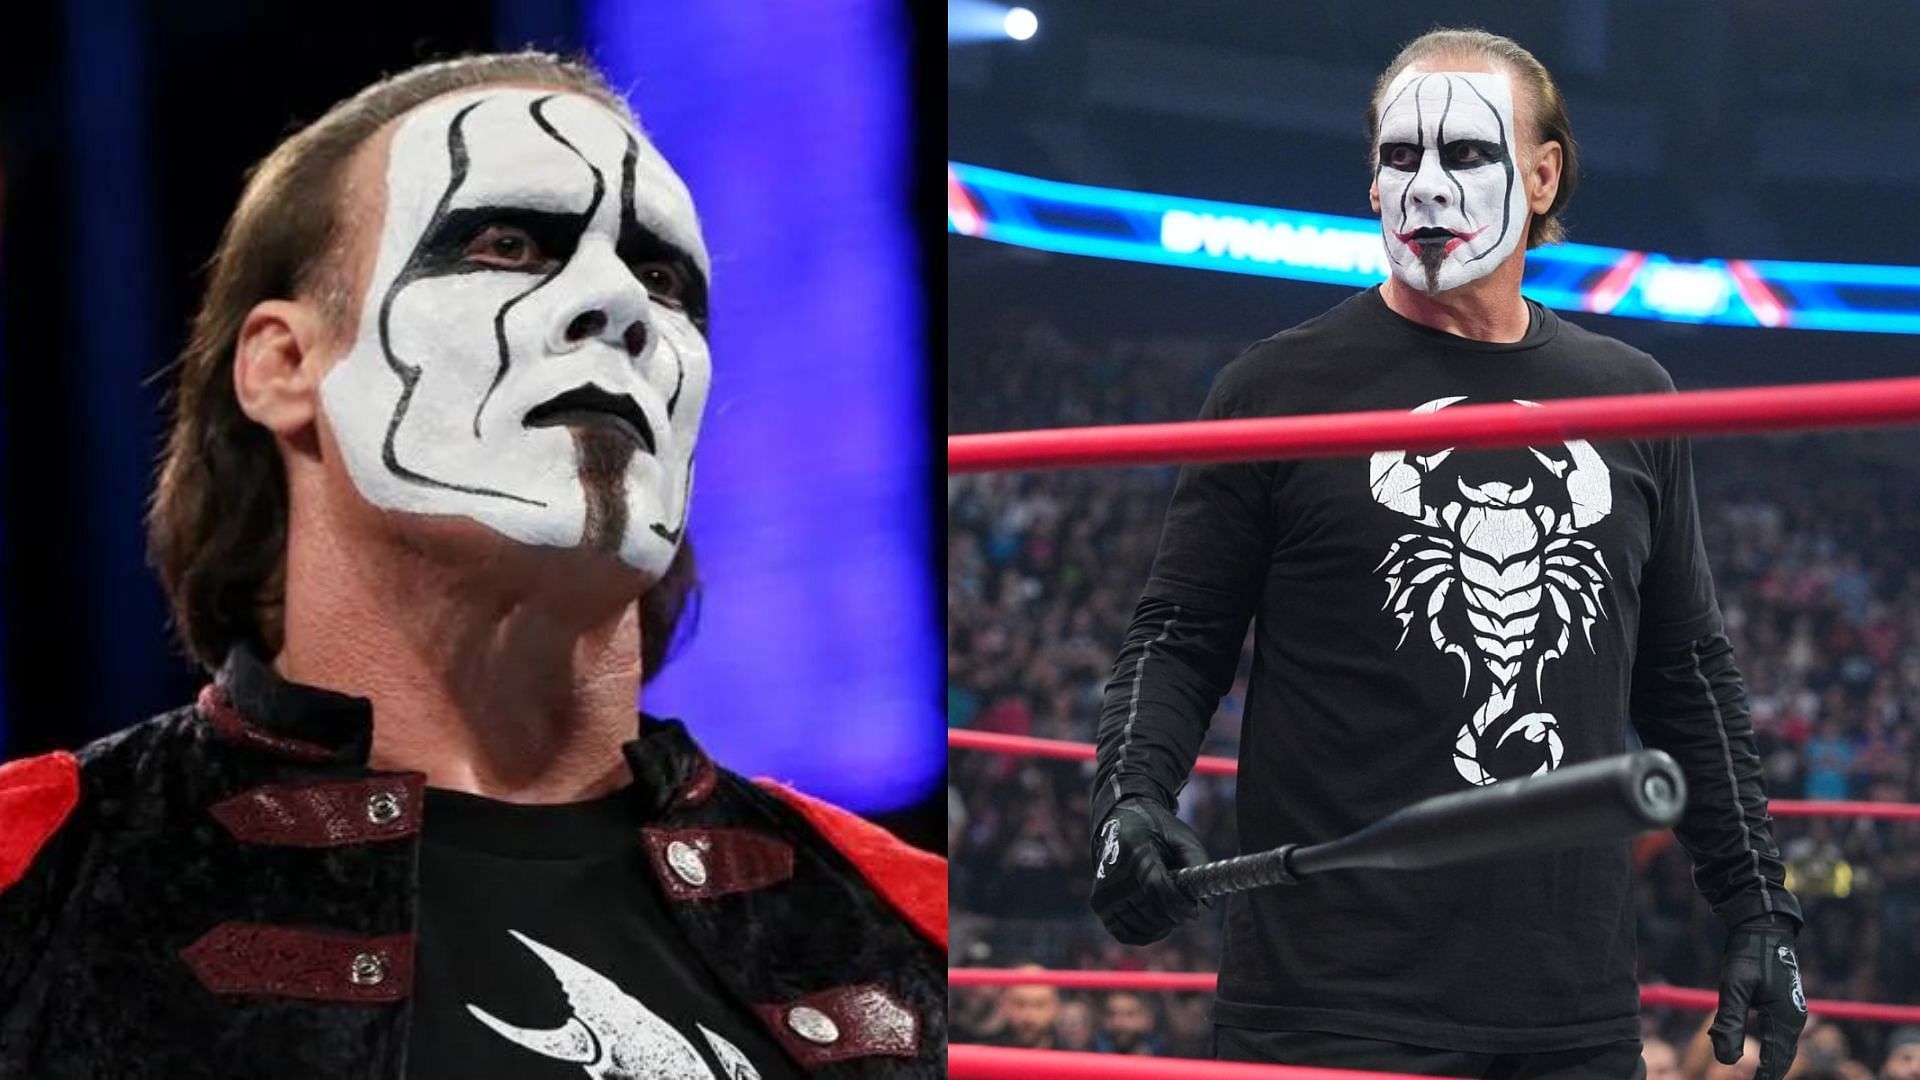 Sting will be retiring from in-ring competition soon